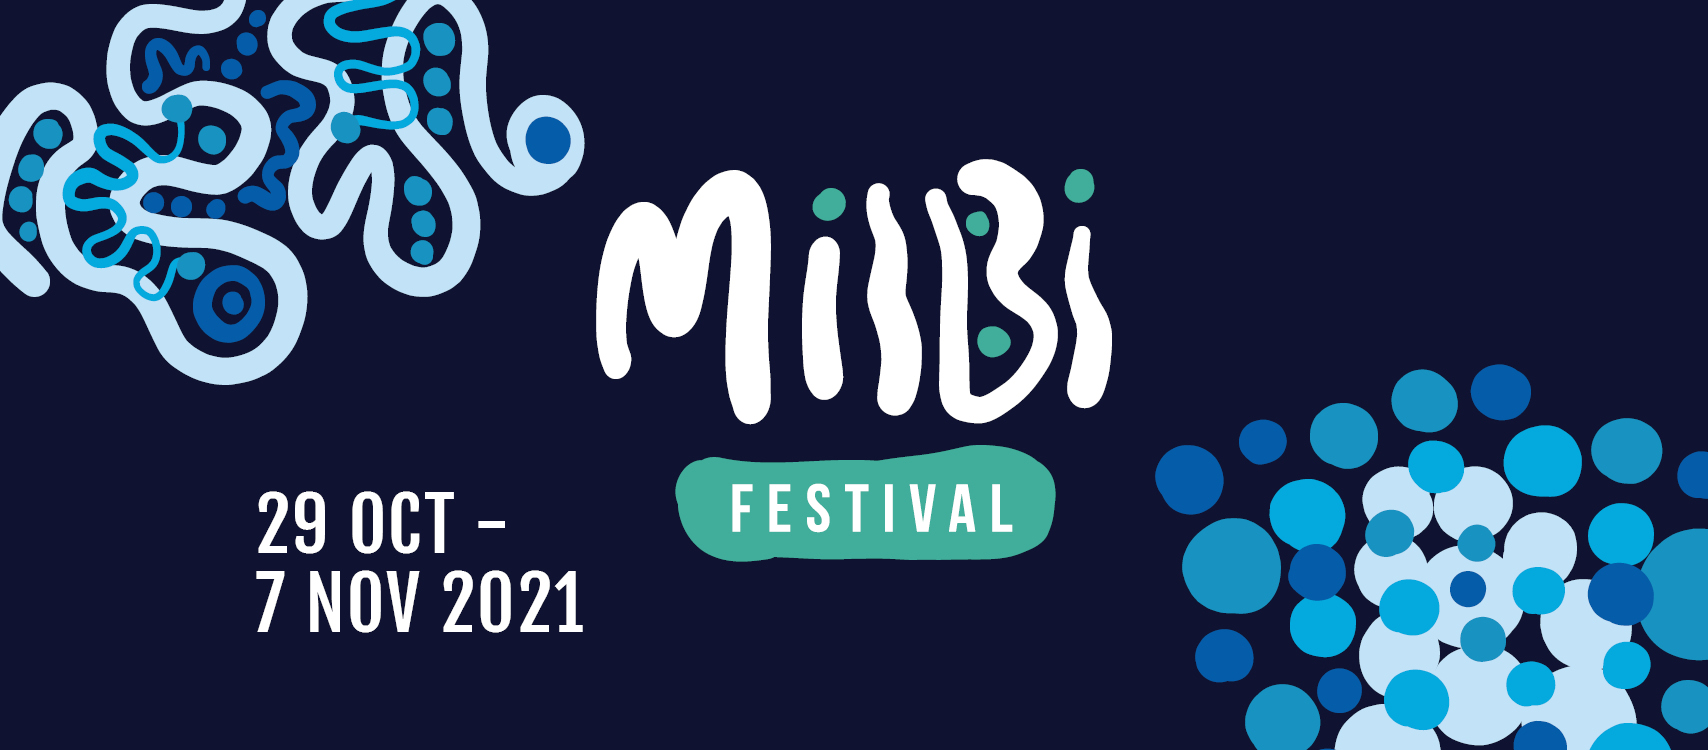 THINGS TO SEE AND DO WHILE IN TOWN FOR THE MILBI FESTIVAL